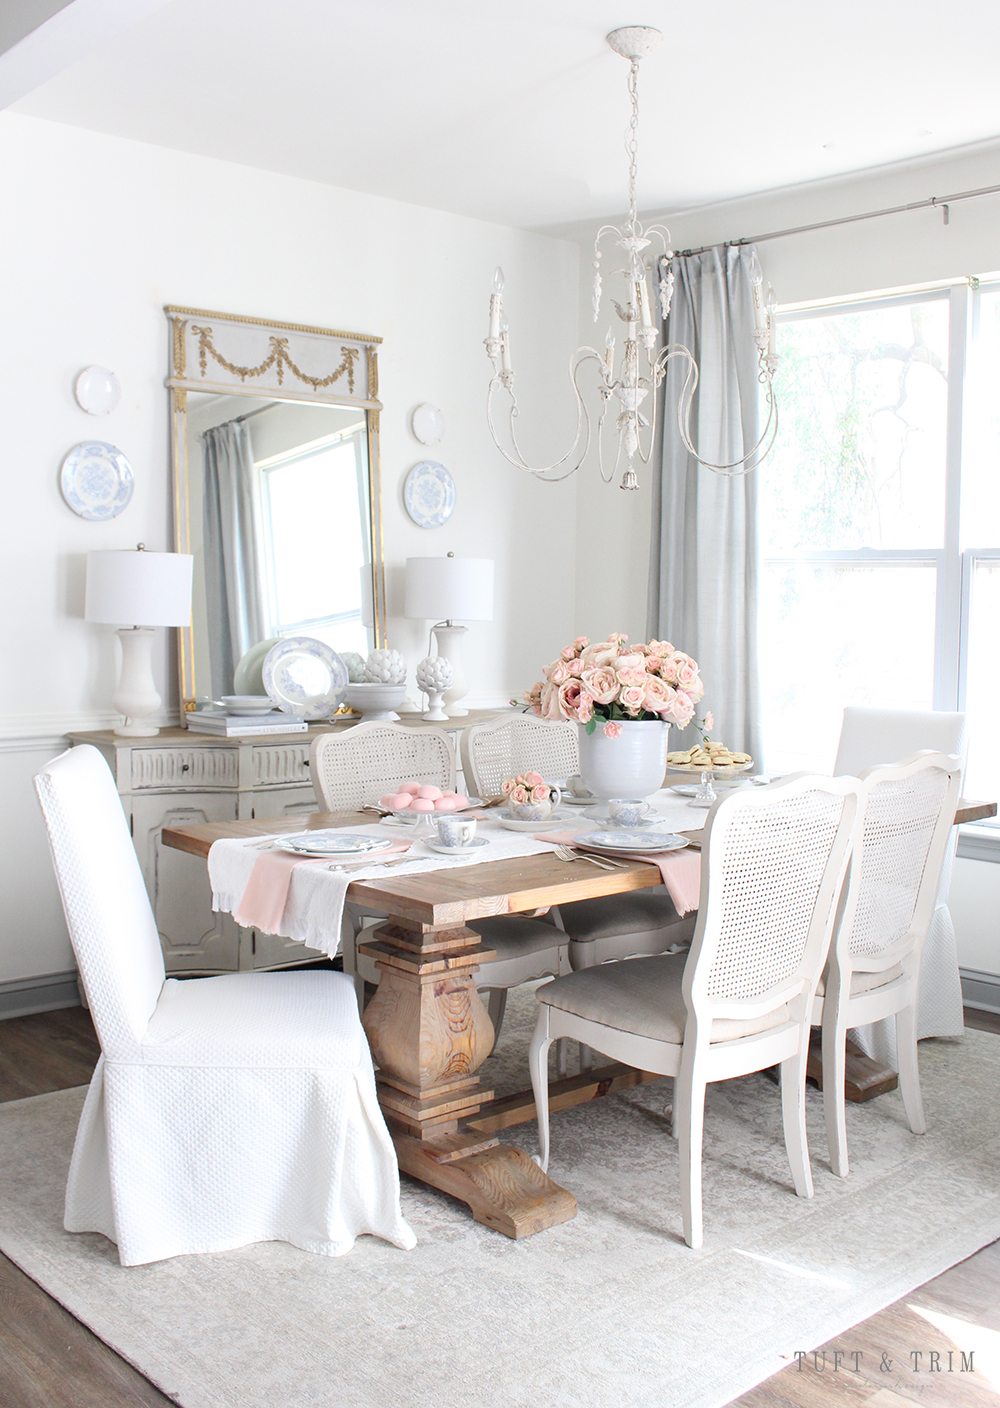 Blue and White Valentine's Day Table with Pink Floral- Tuft & Trim Interior Design